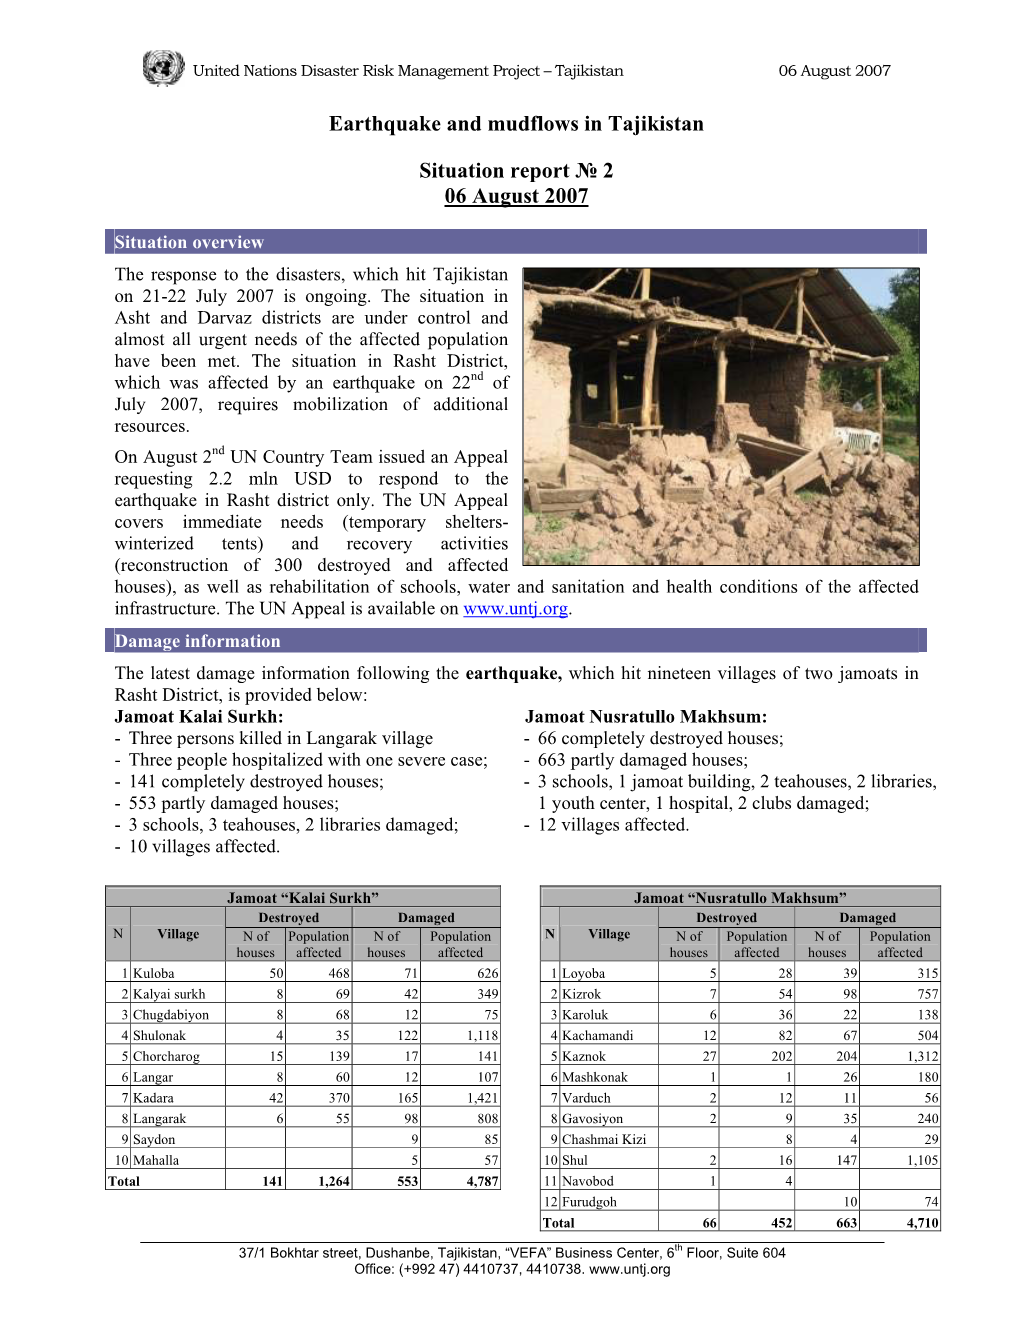 Earthquake and Mudflows in Tajikistan Situation Report № 2 06 August 2007